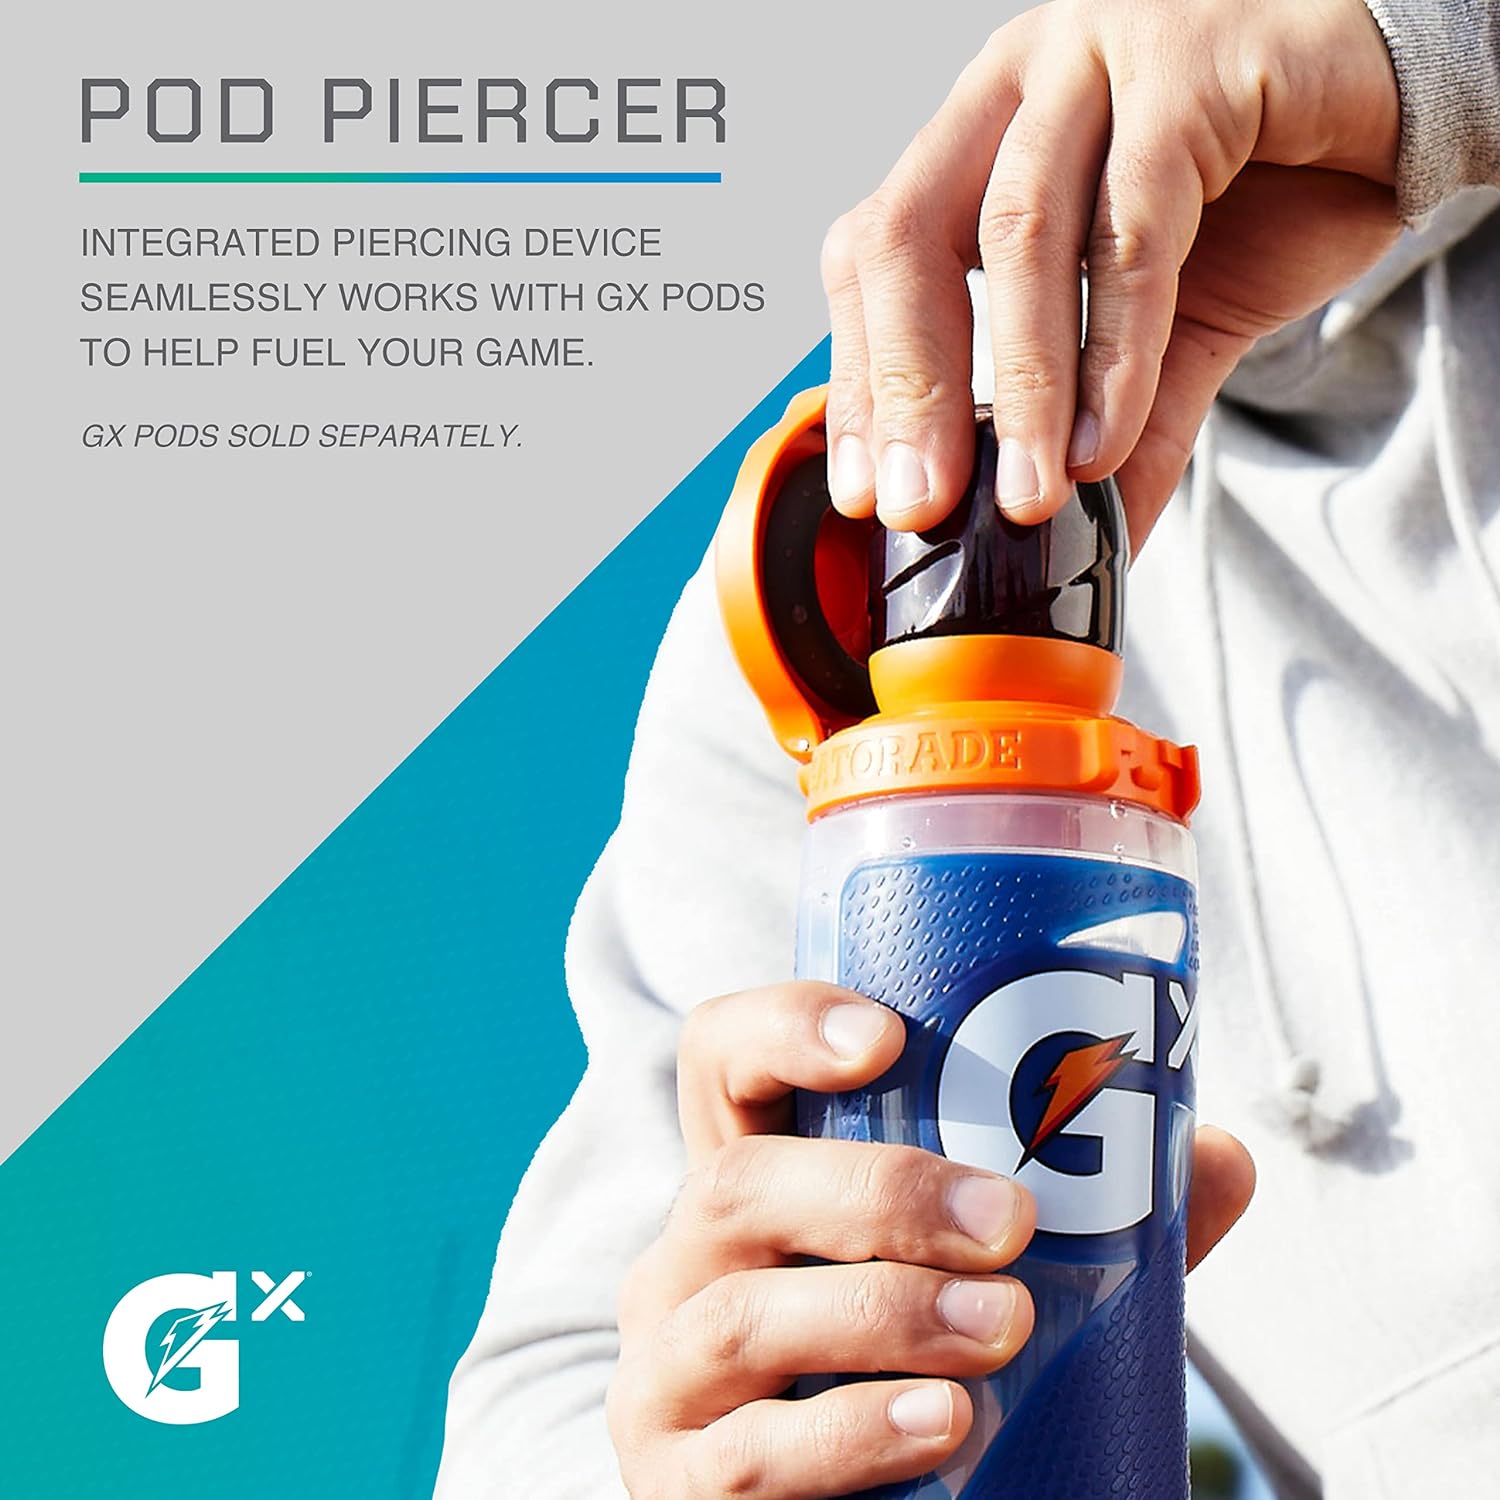 Gatorade Gx Hydration System, Non-Slip Gx Squeeze Bottles & Gx Sports Drink Concentrate Pods,Gray : Sports & Outdoors